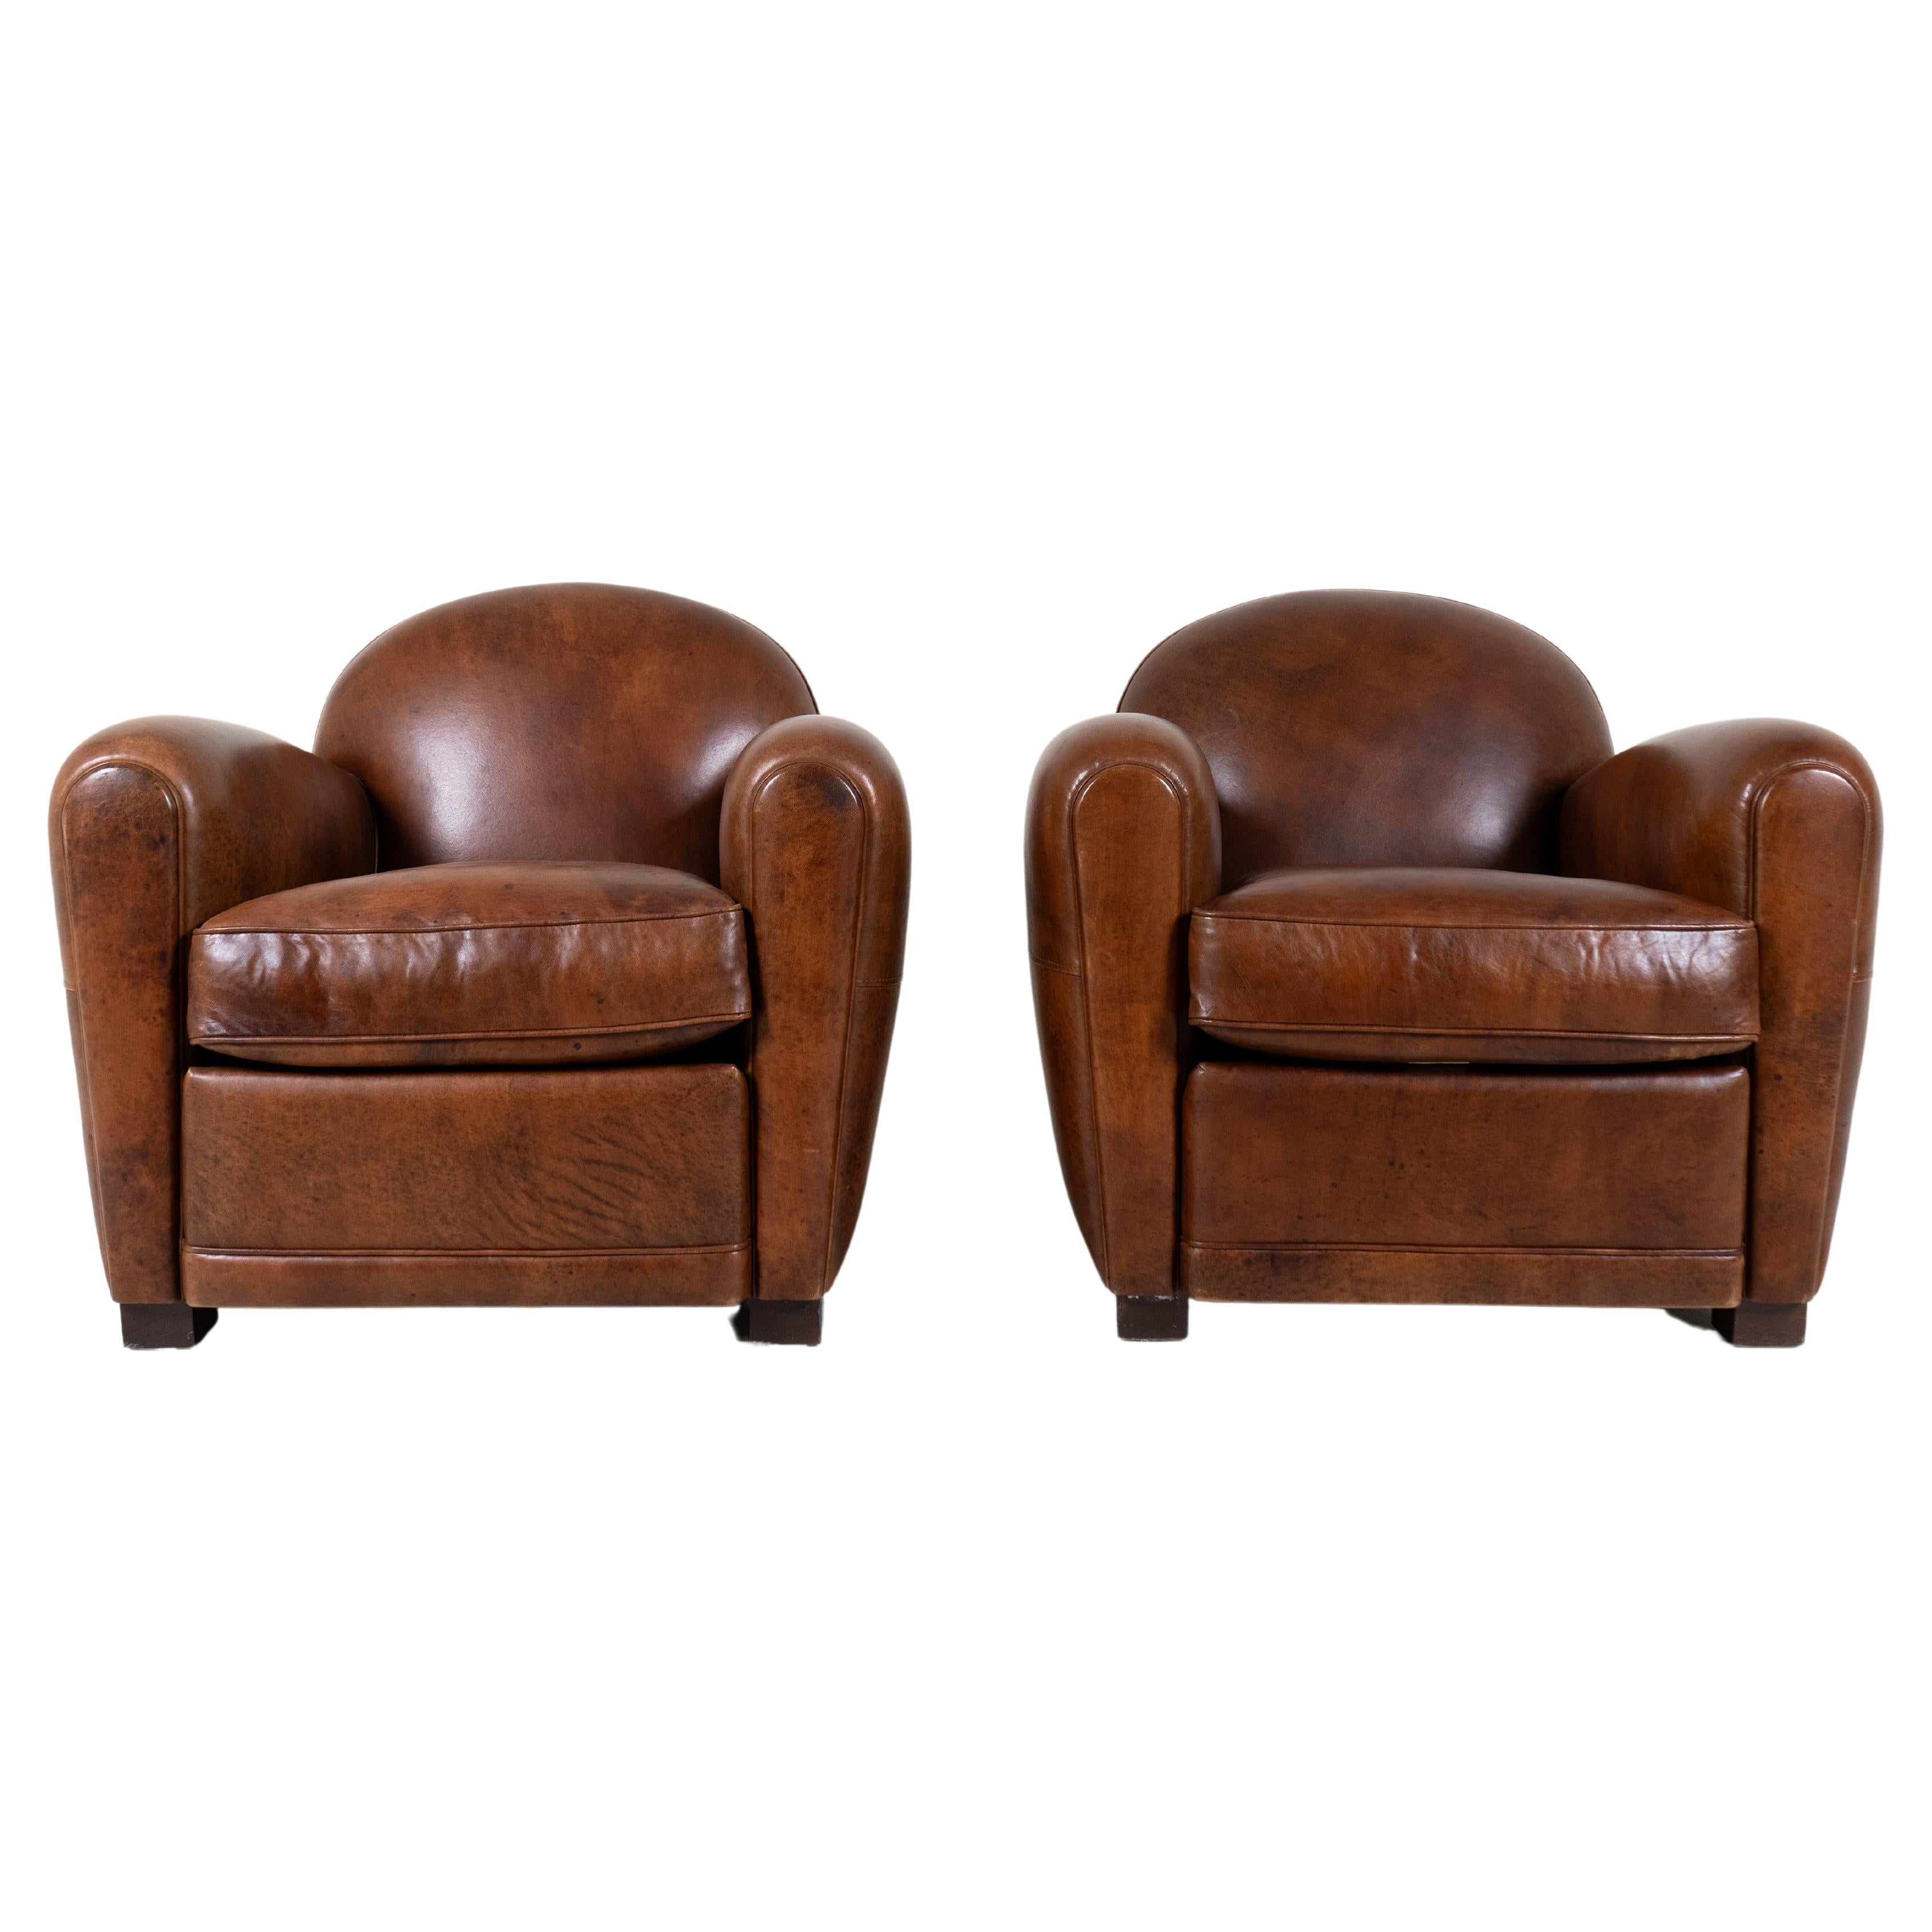 A Pair of Demi Lune French Club Chairs in Patinated Leather For Sale